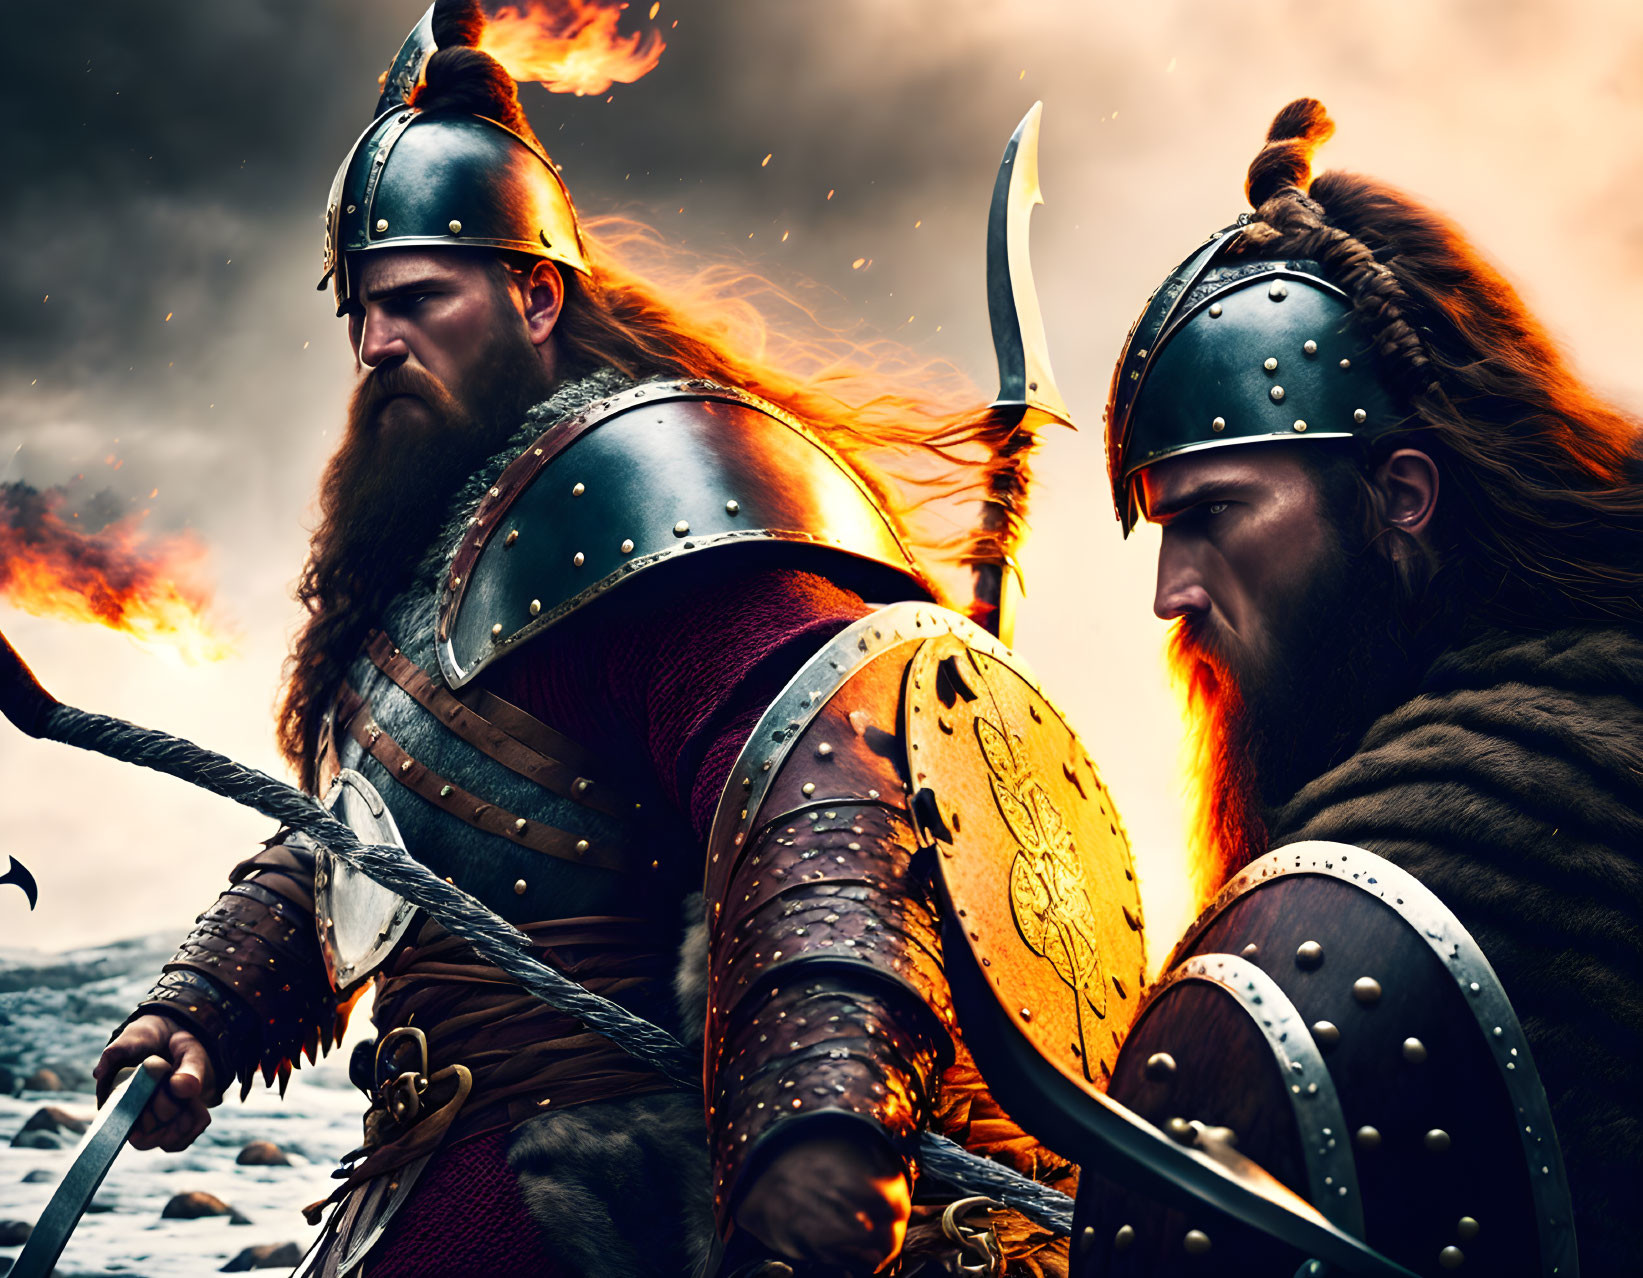 Viking warriors in armor facing stormy sky and flames